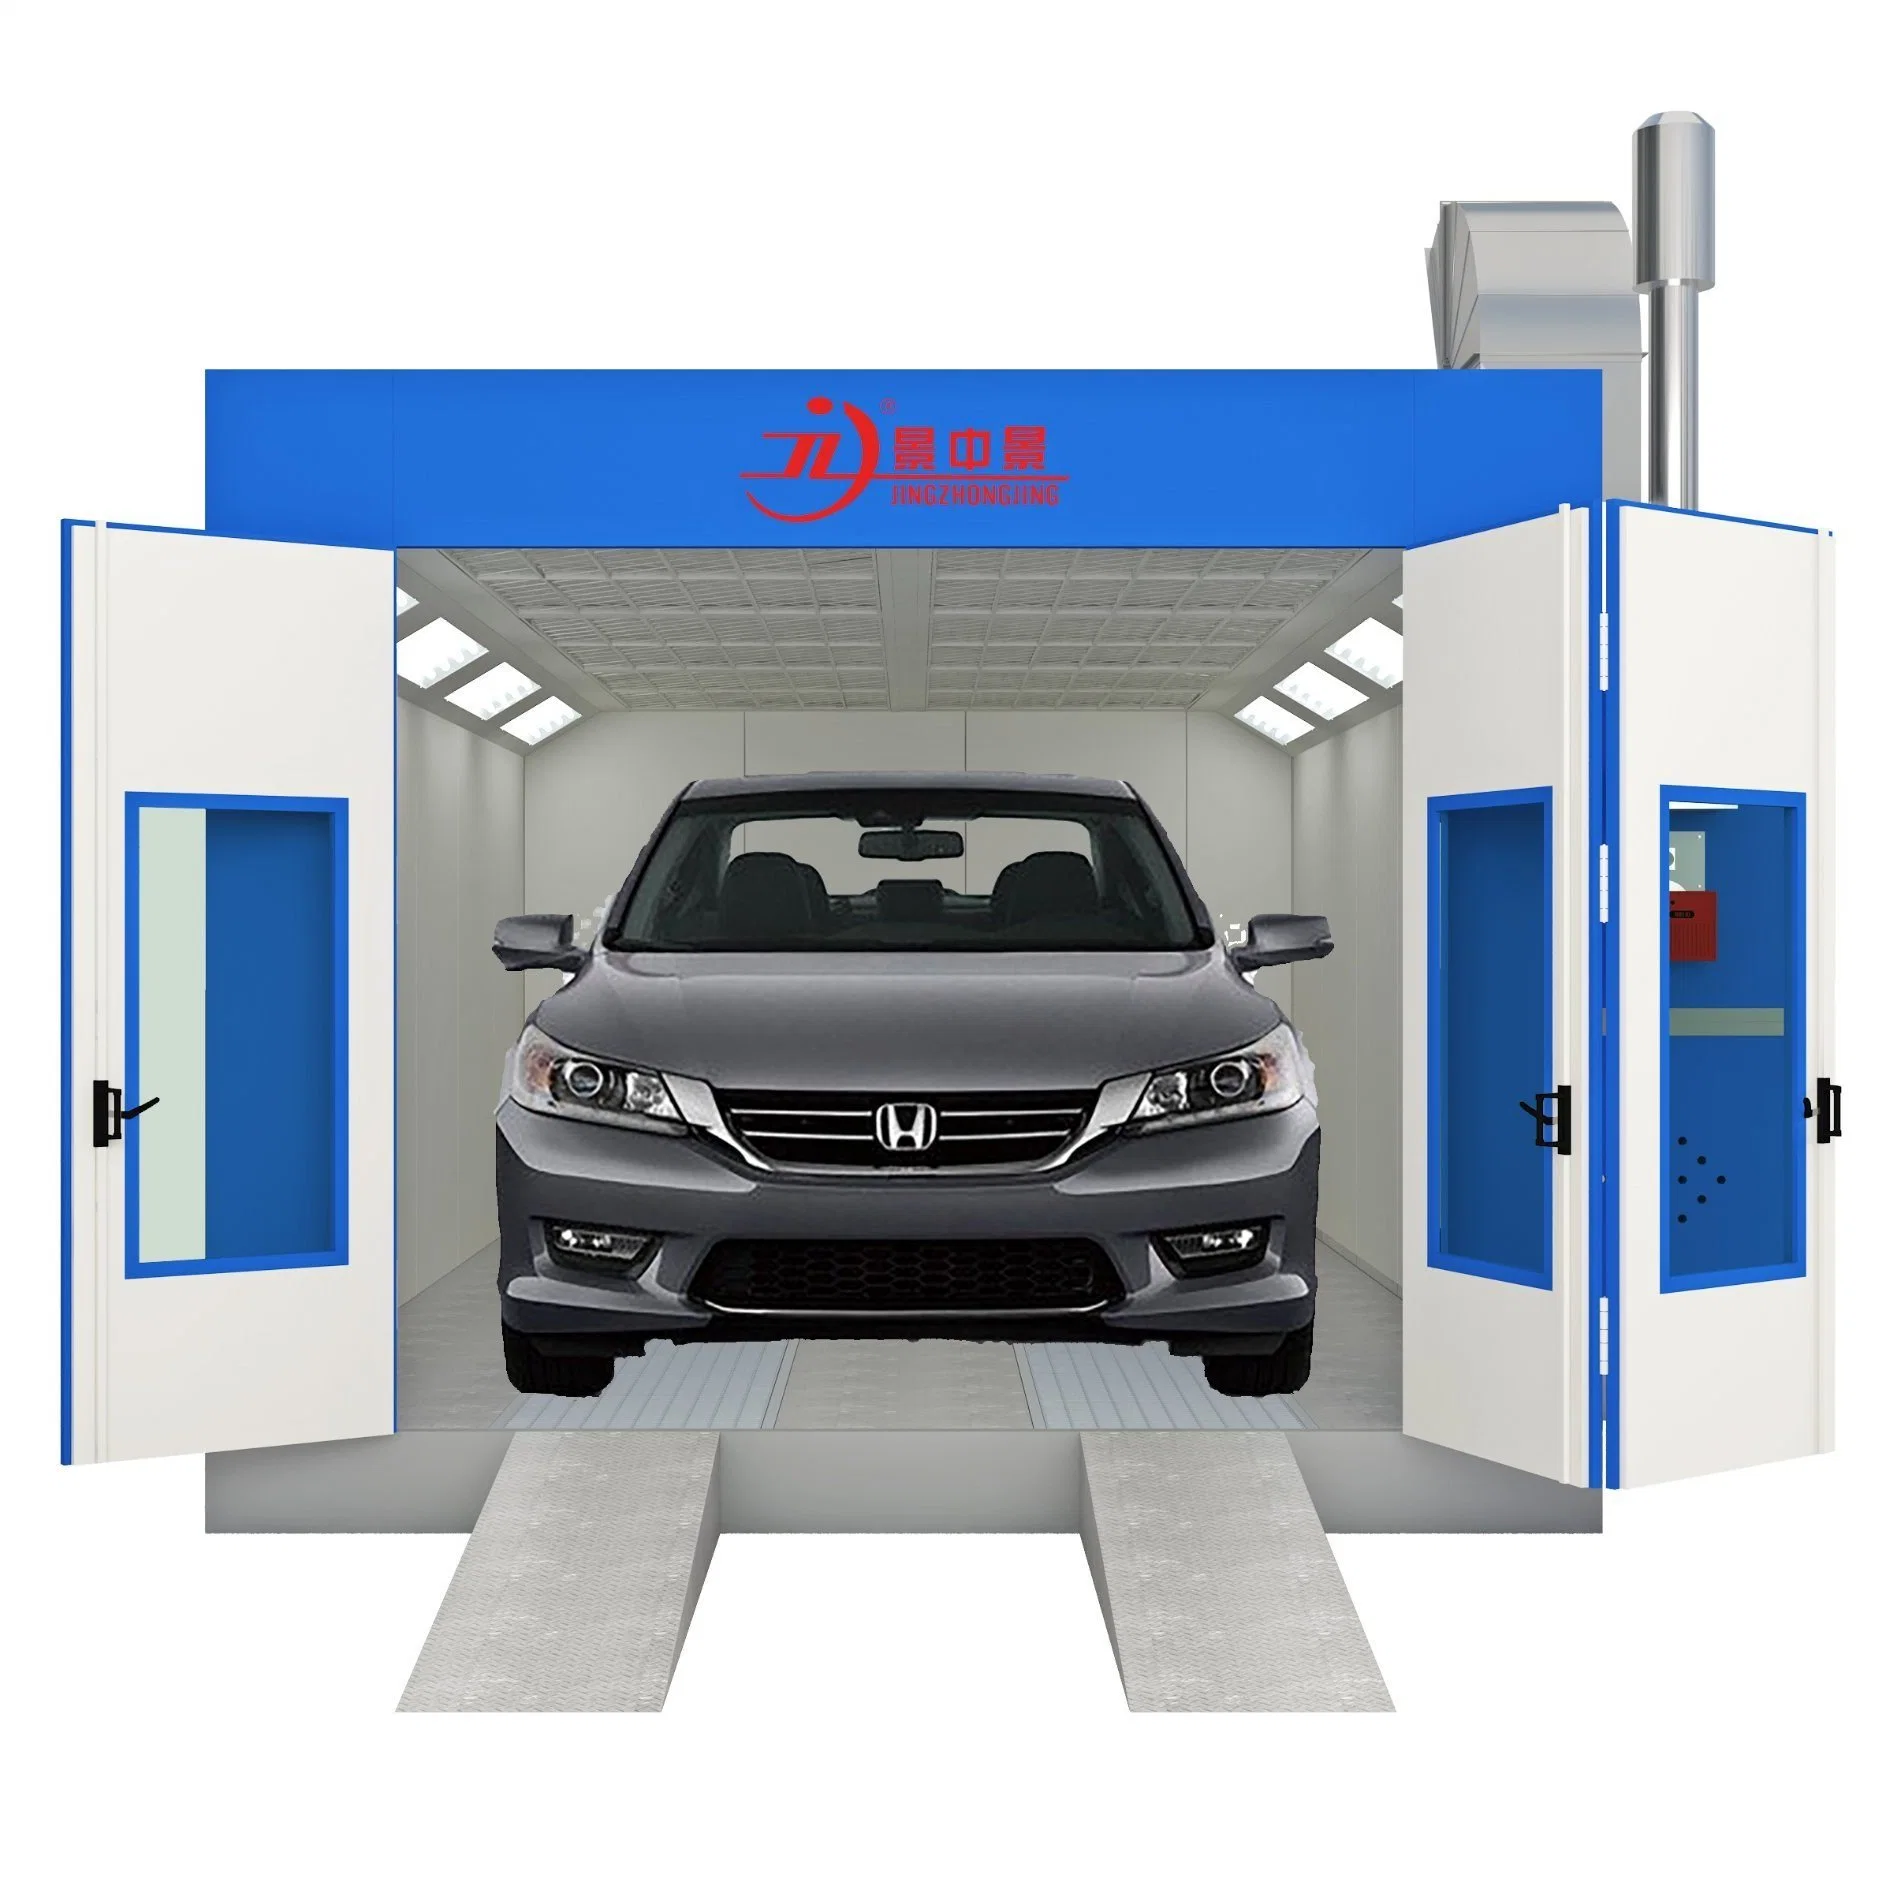 Preparation Station Car Painting Oven Garage Equipment for Car Painting